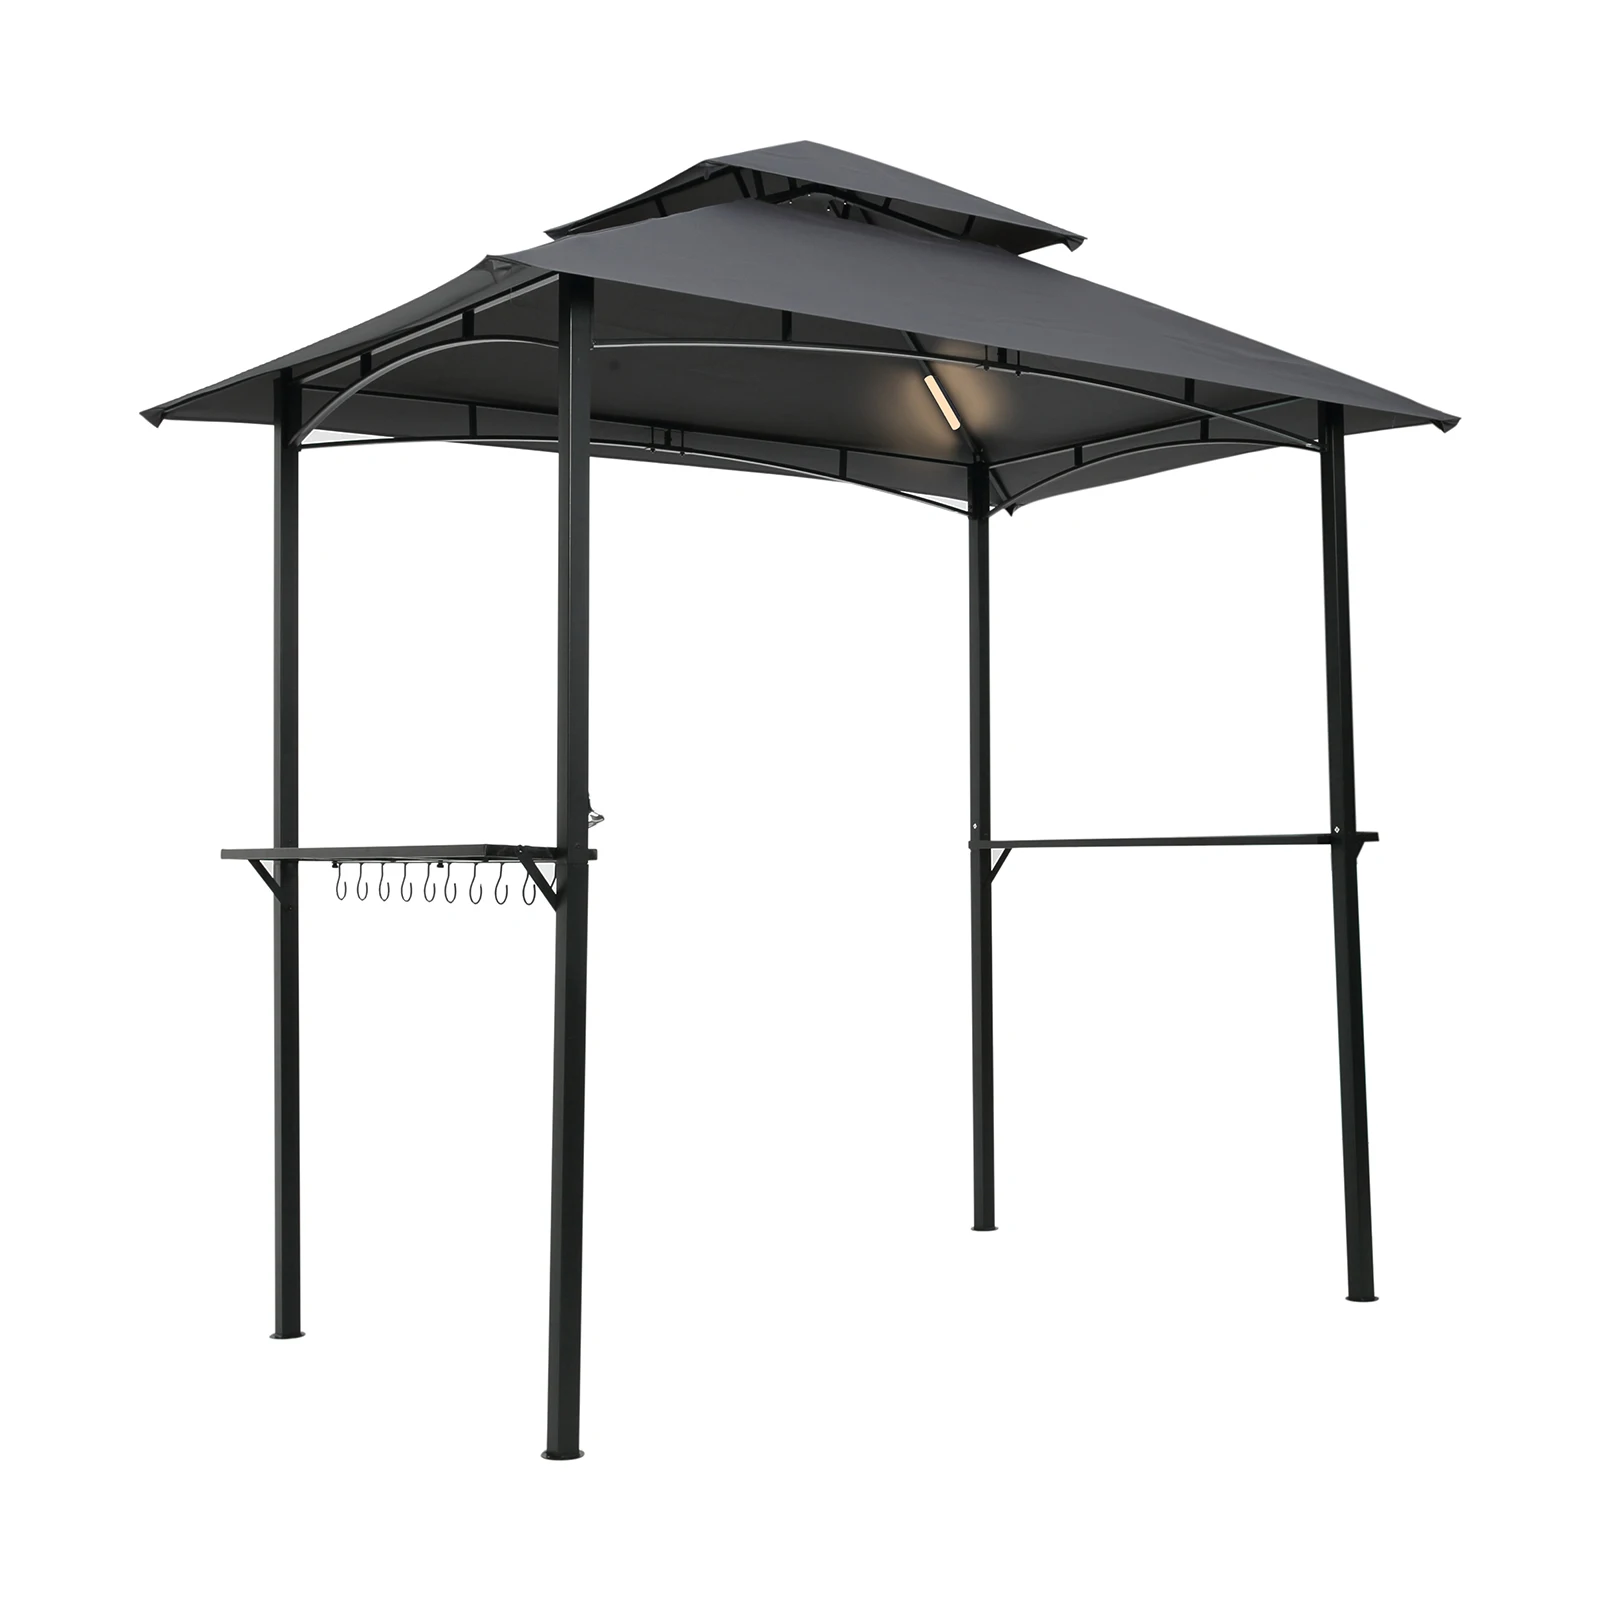 8 x 5 Ft Shelter Tent Outdoor BBQ Grill Gazebo With Light Do